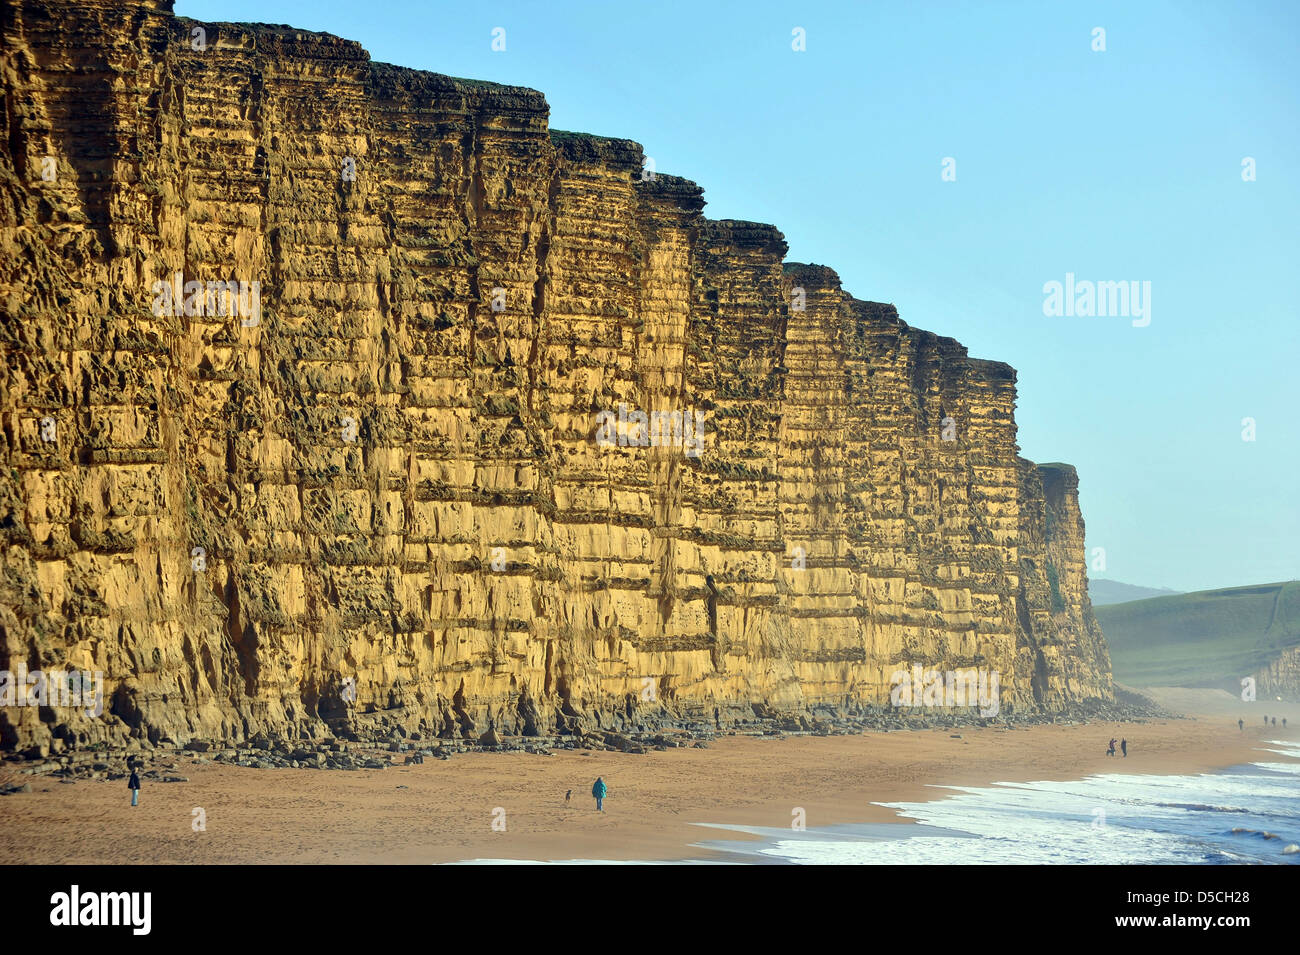 West Bay Beach and East cliff, Westbay, Dorset, Britain, UK Stock Photo